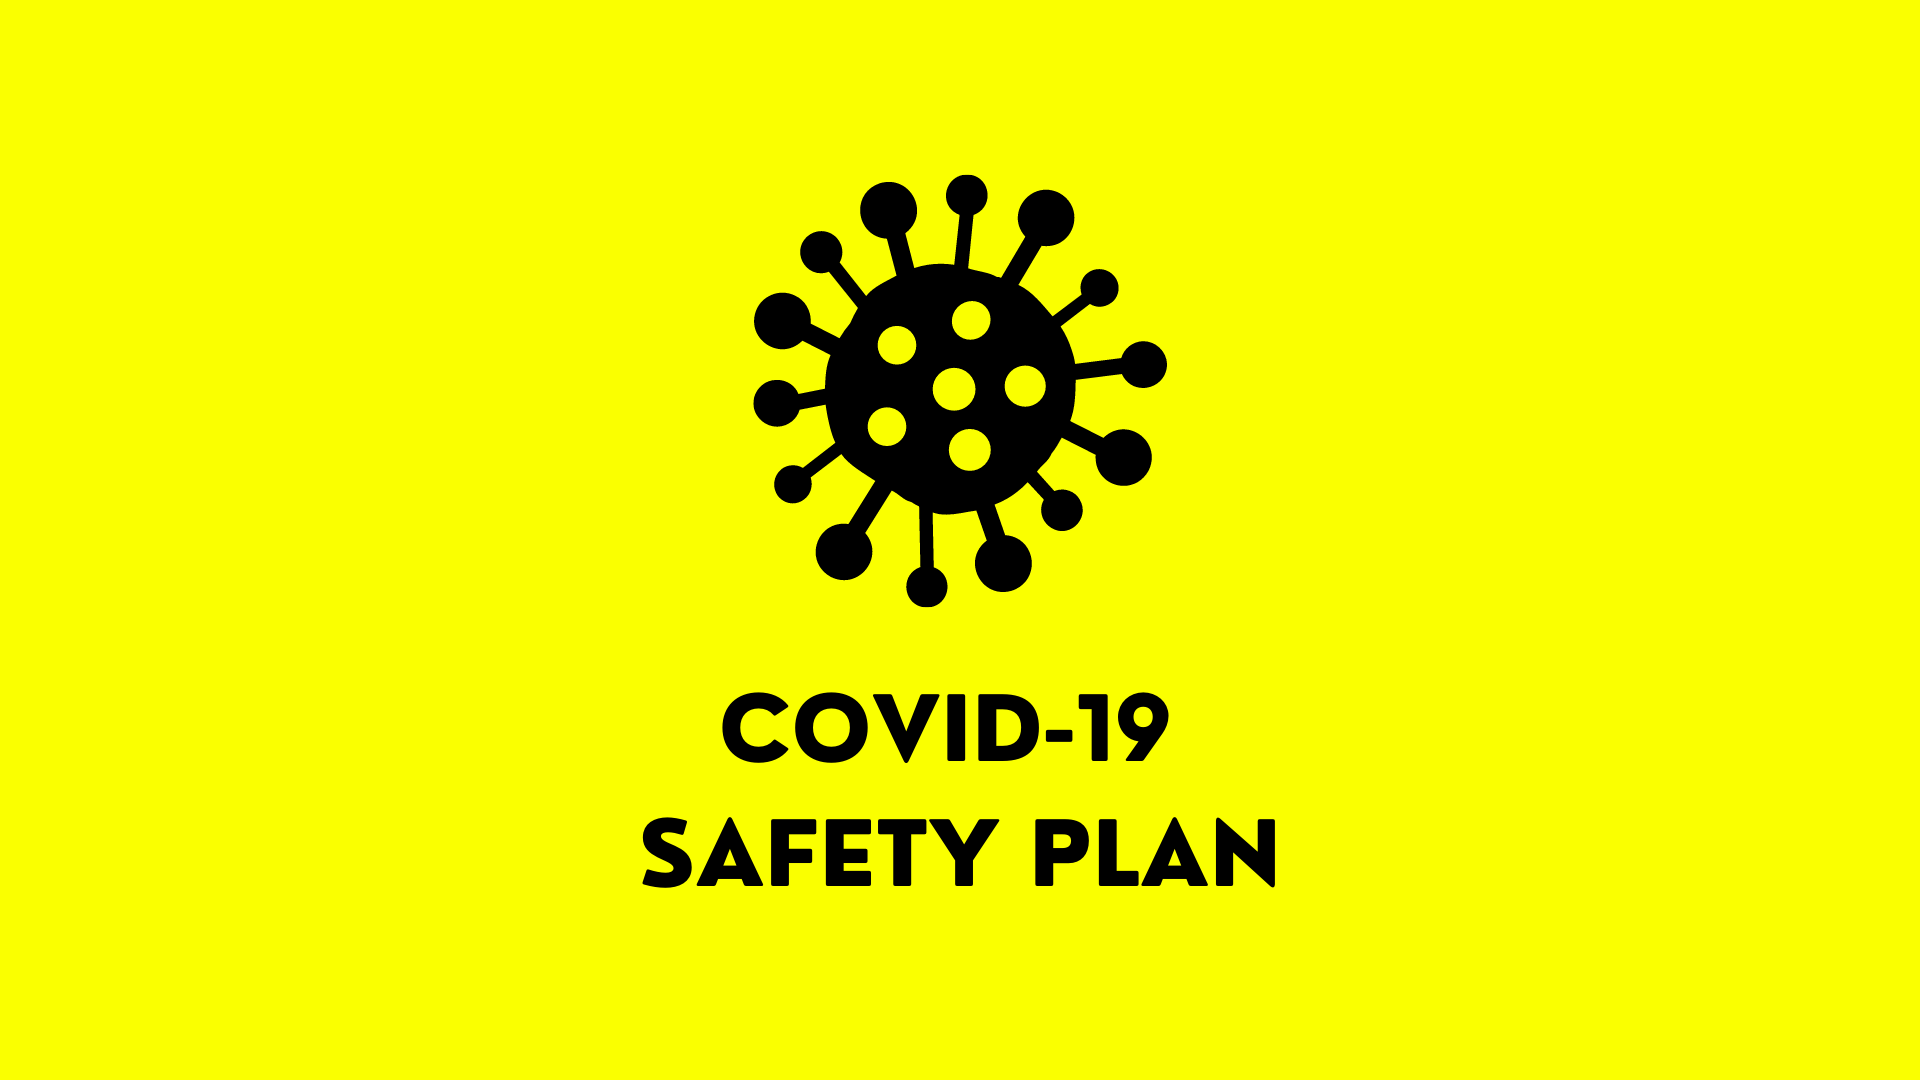 COVID-19 Safety Plan